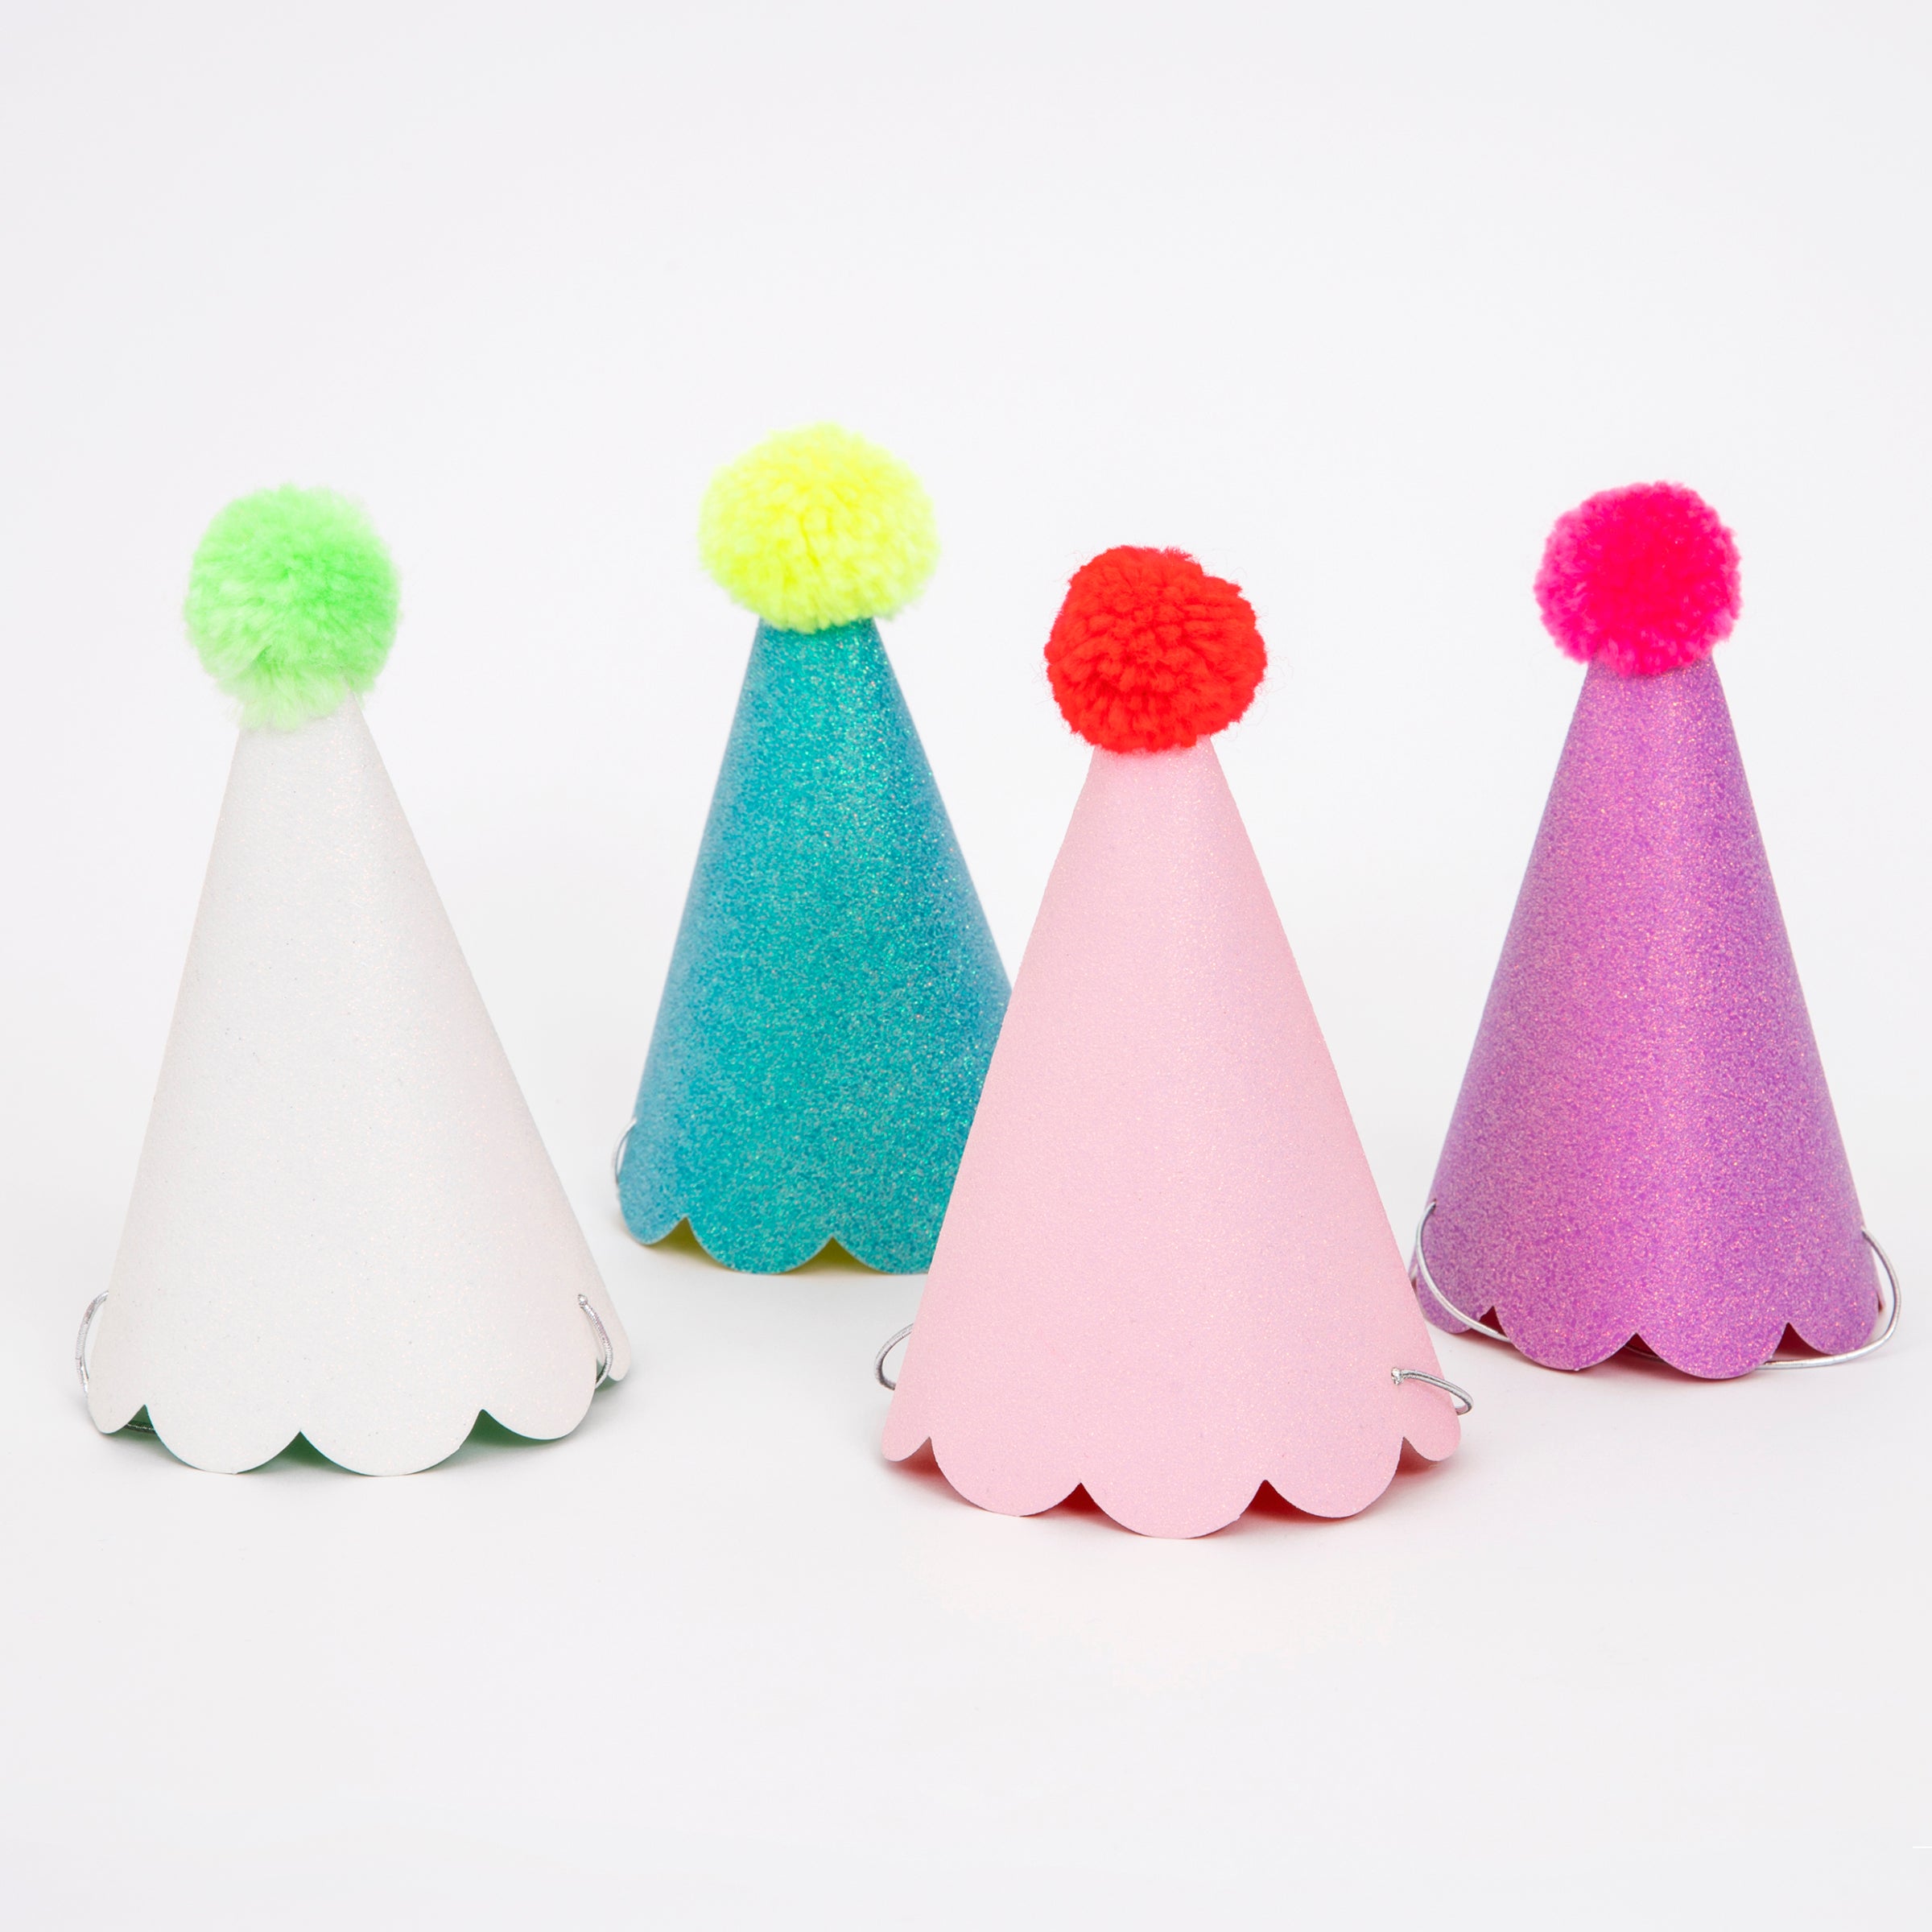 These fun hats are topped with colorful pompoms and covered with crystal glitter.